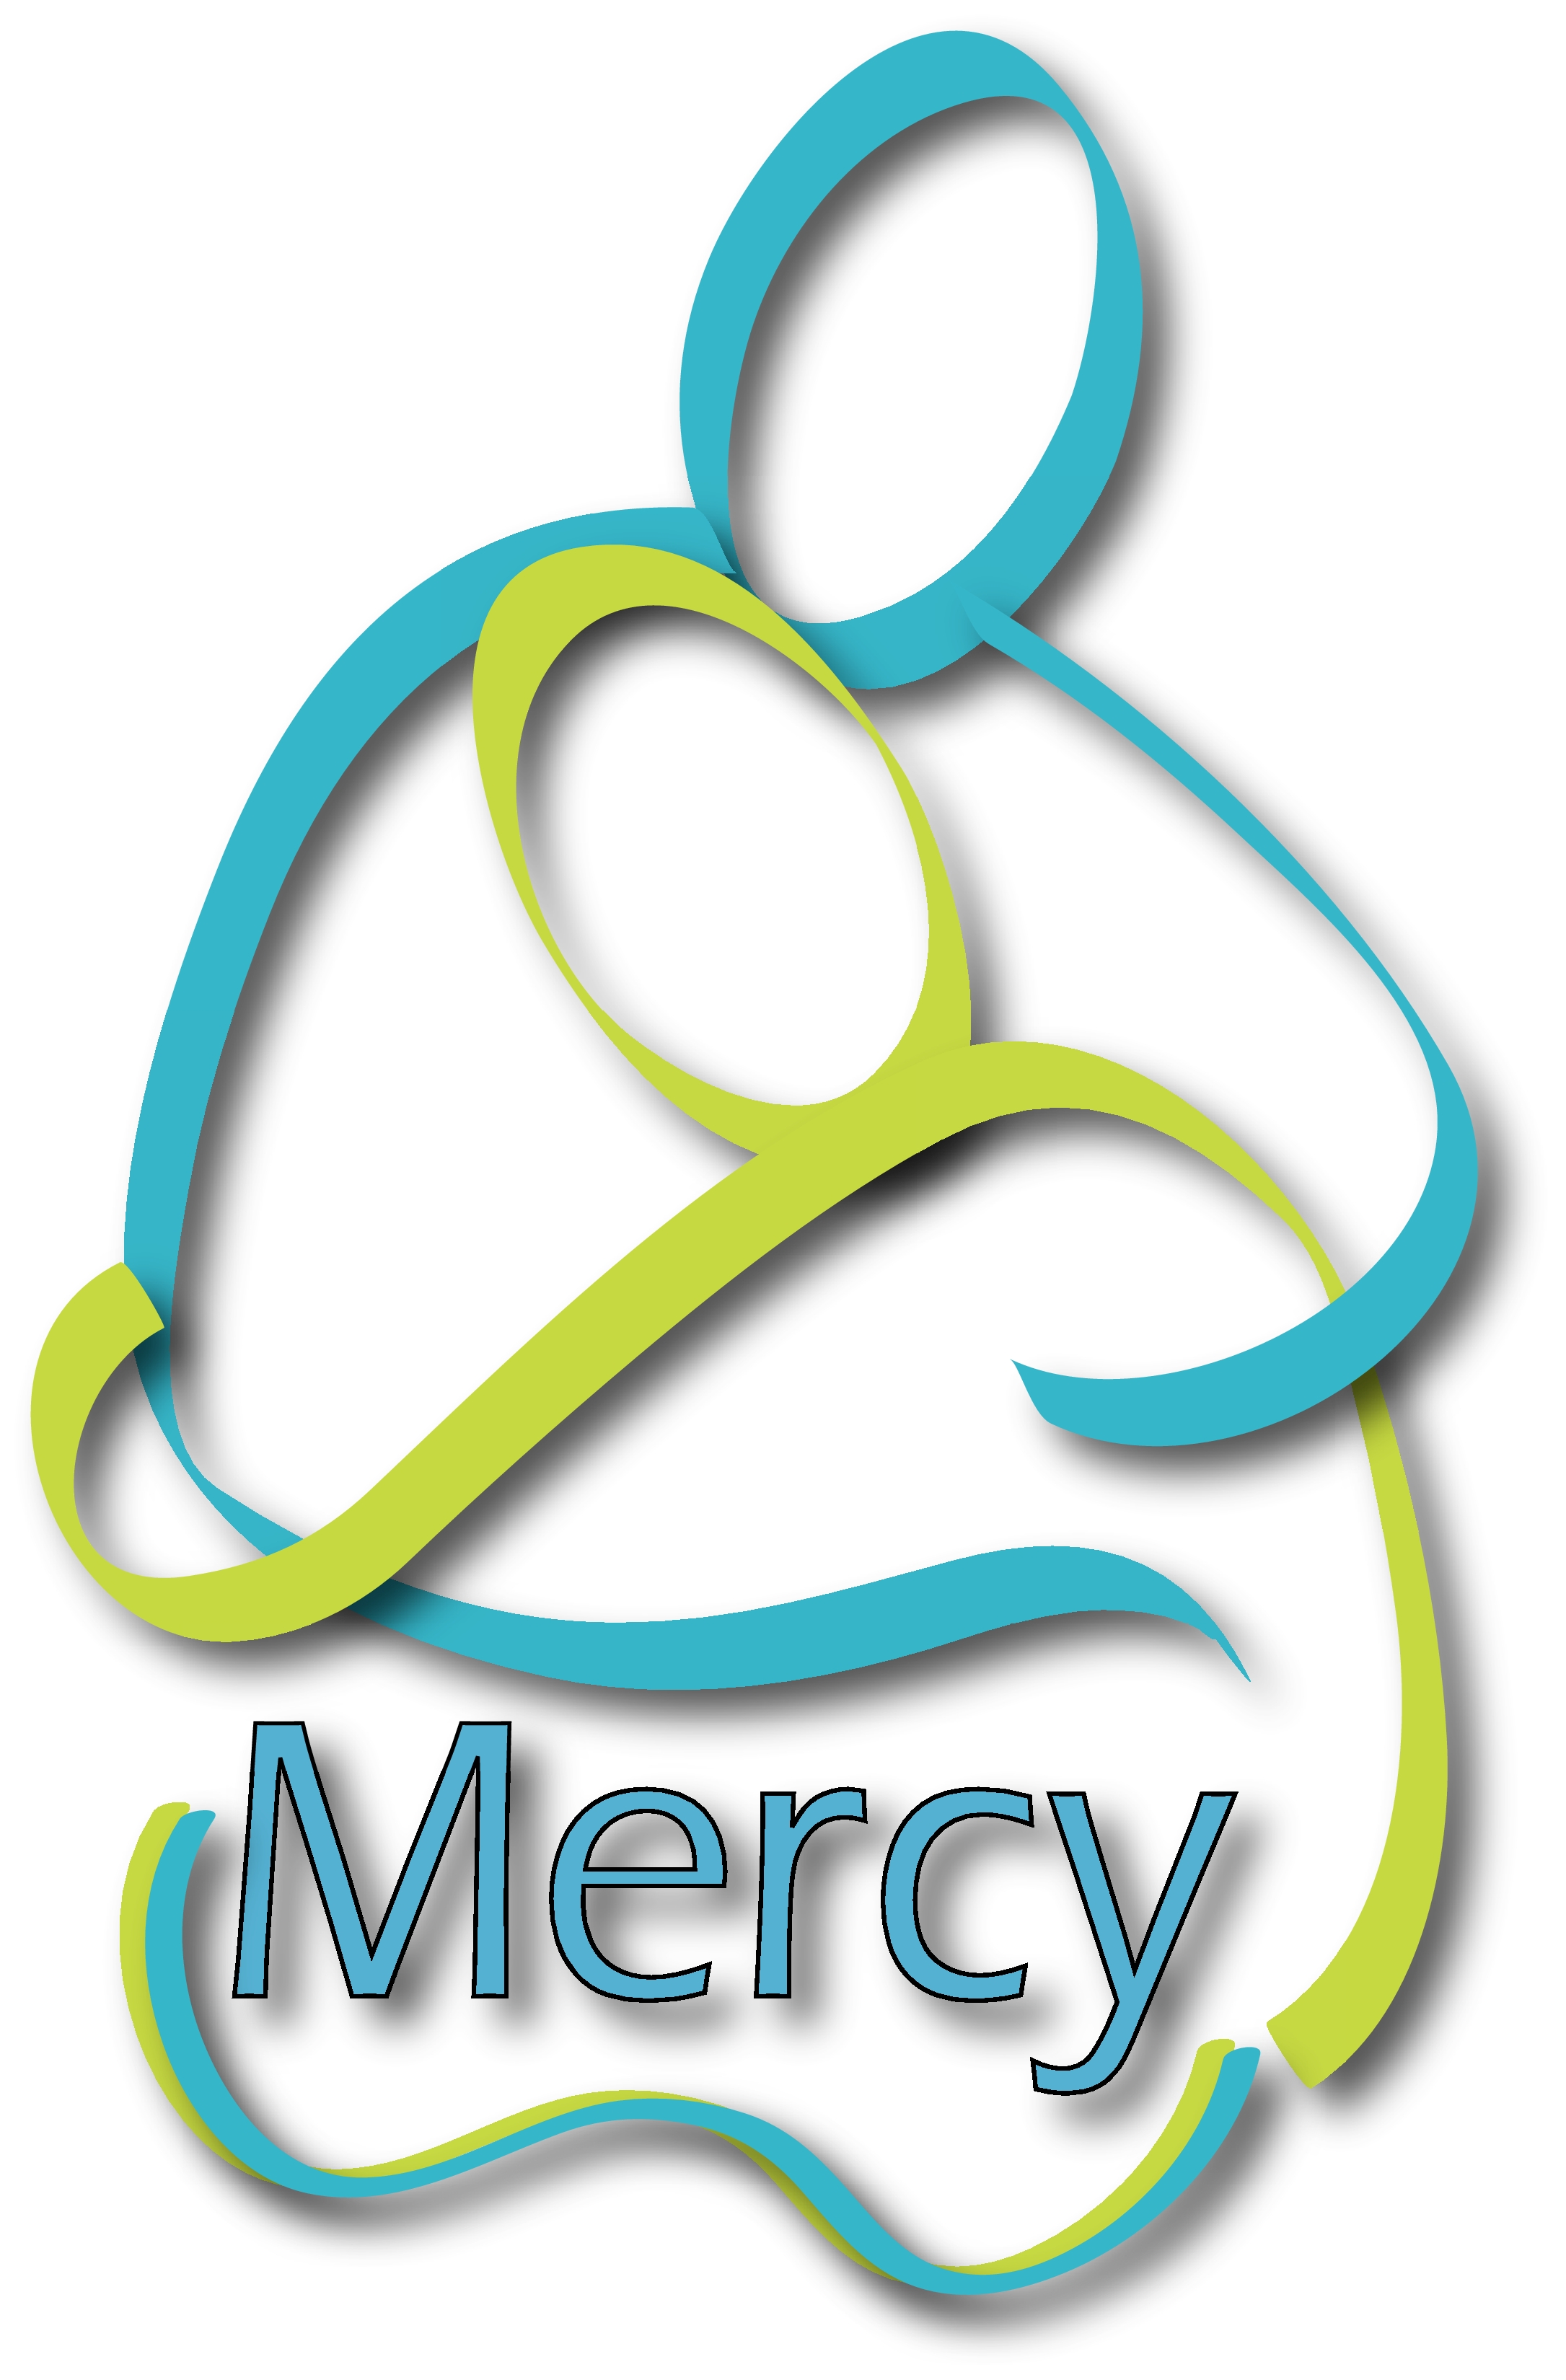 divine-mercy-image-clipart-clip-art-library